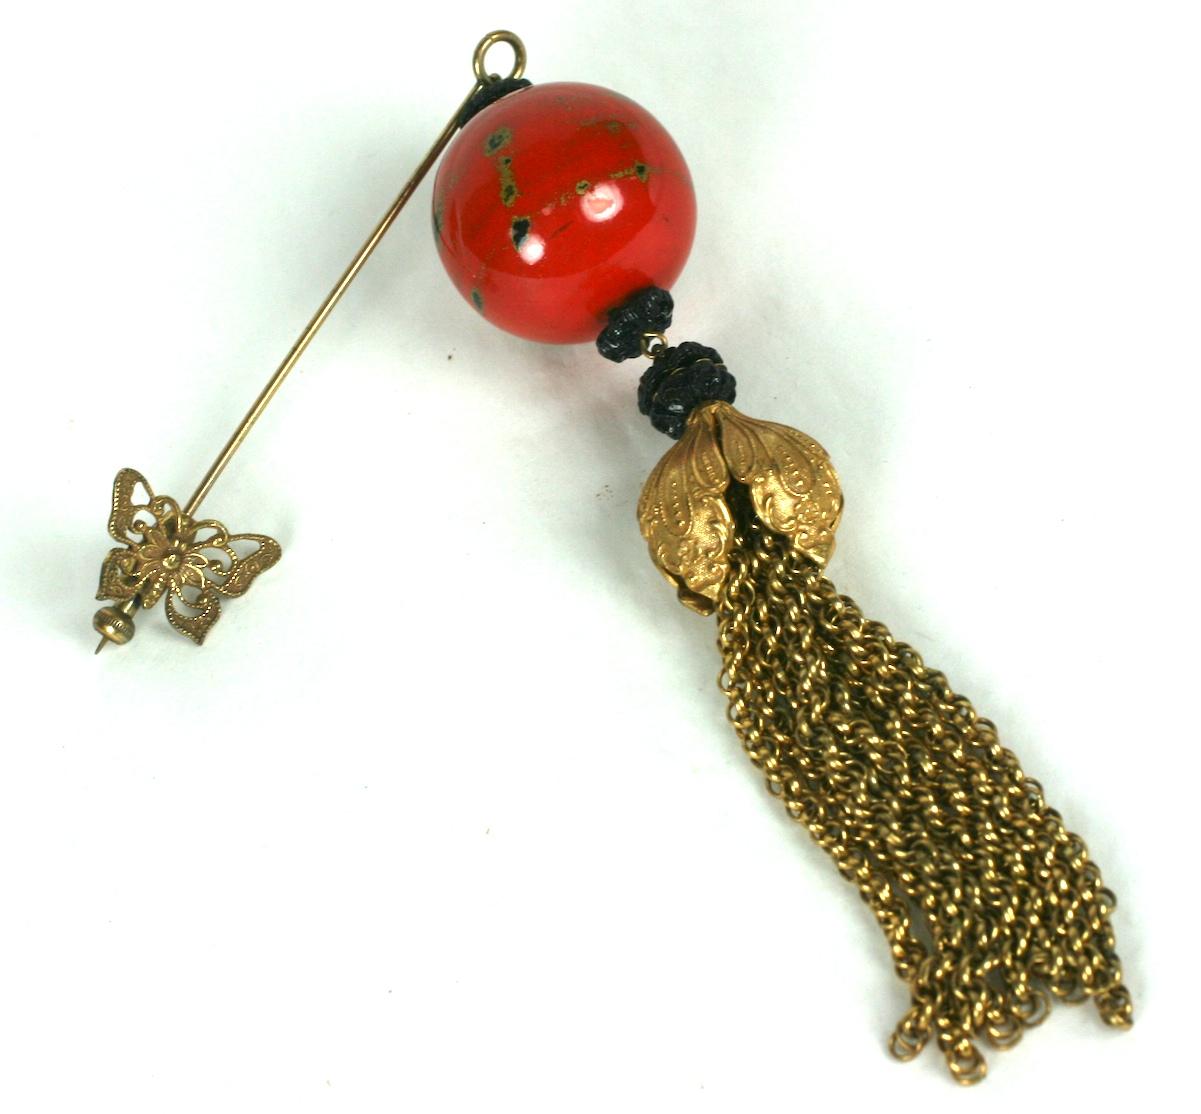 Striking Miriam Haskell Chinoiserie Stick Pin Brooch from the 1950's. Signature Russian Gilt metal with lacquered red and black bead, black floral spacers and massive tassel. Butterfly plunger clasp.
4.5